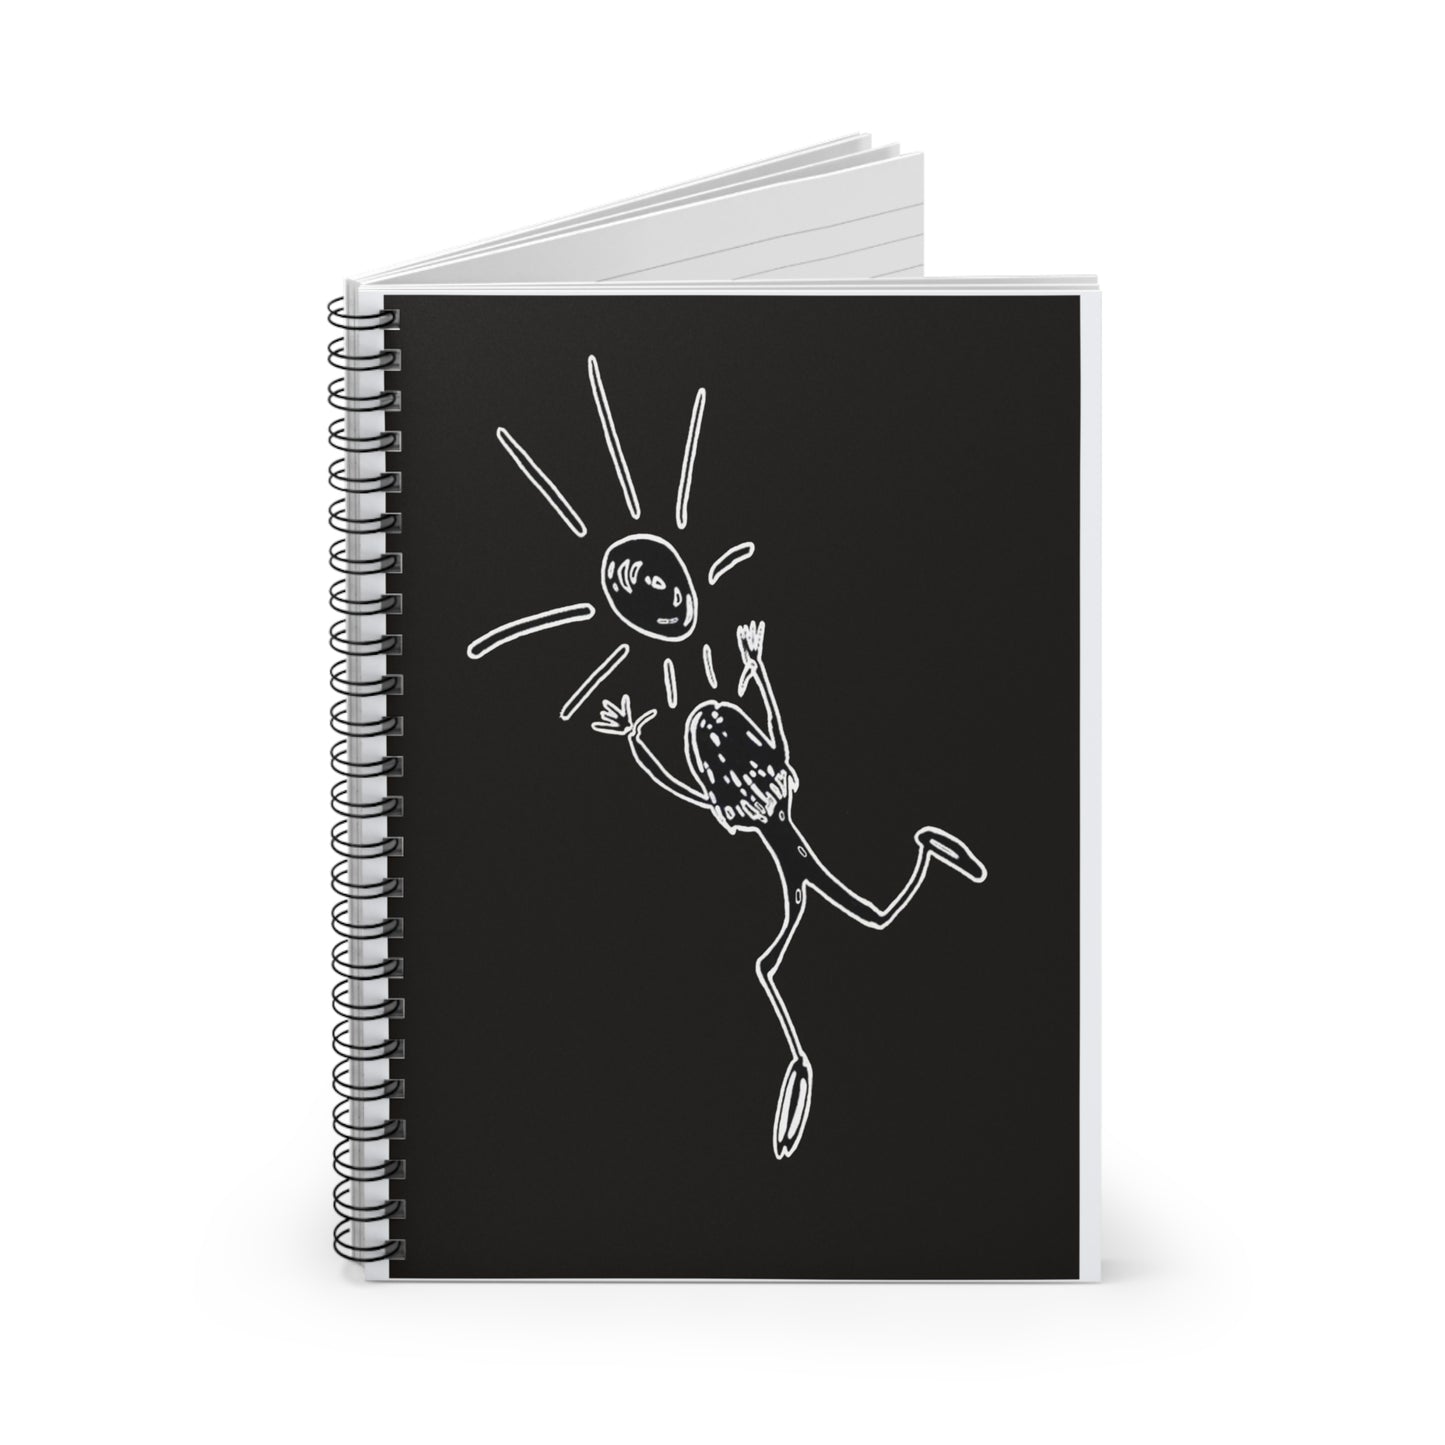 Shine Your Light Spiral Notebook - Ruled Line